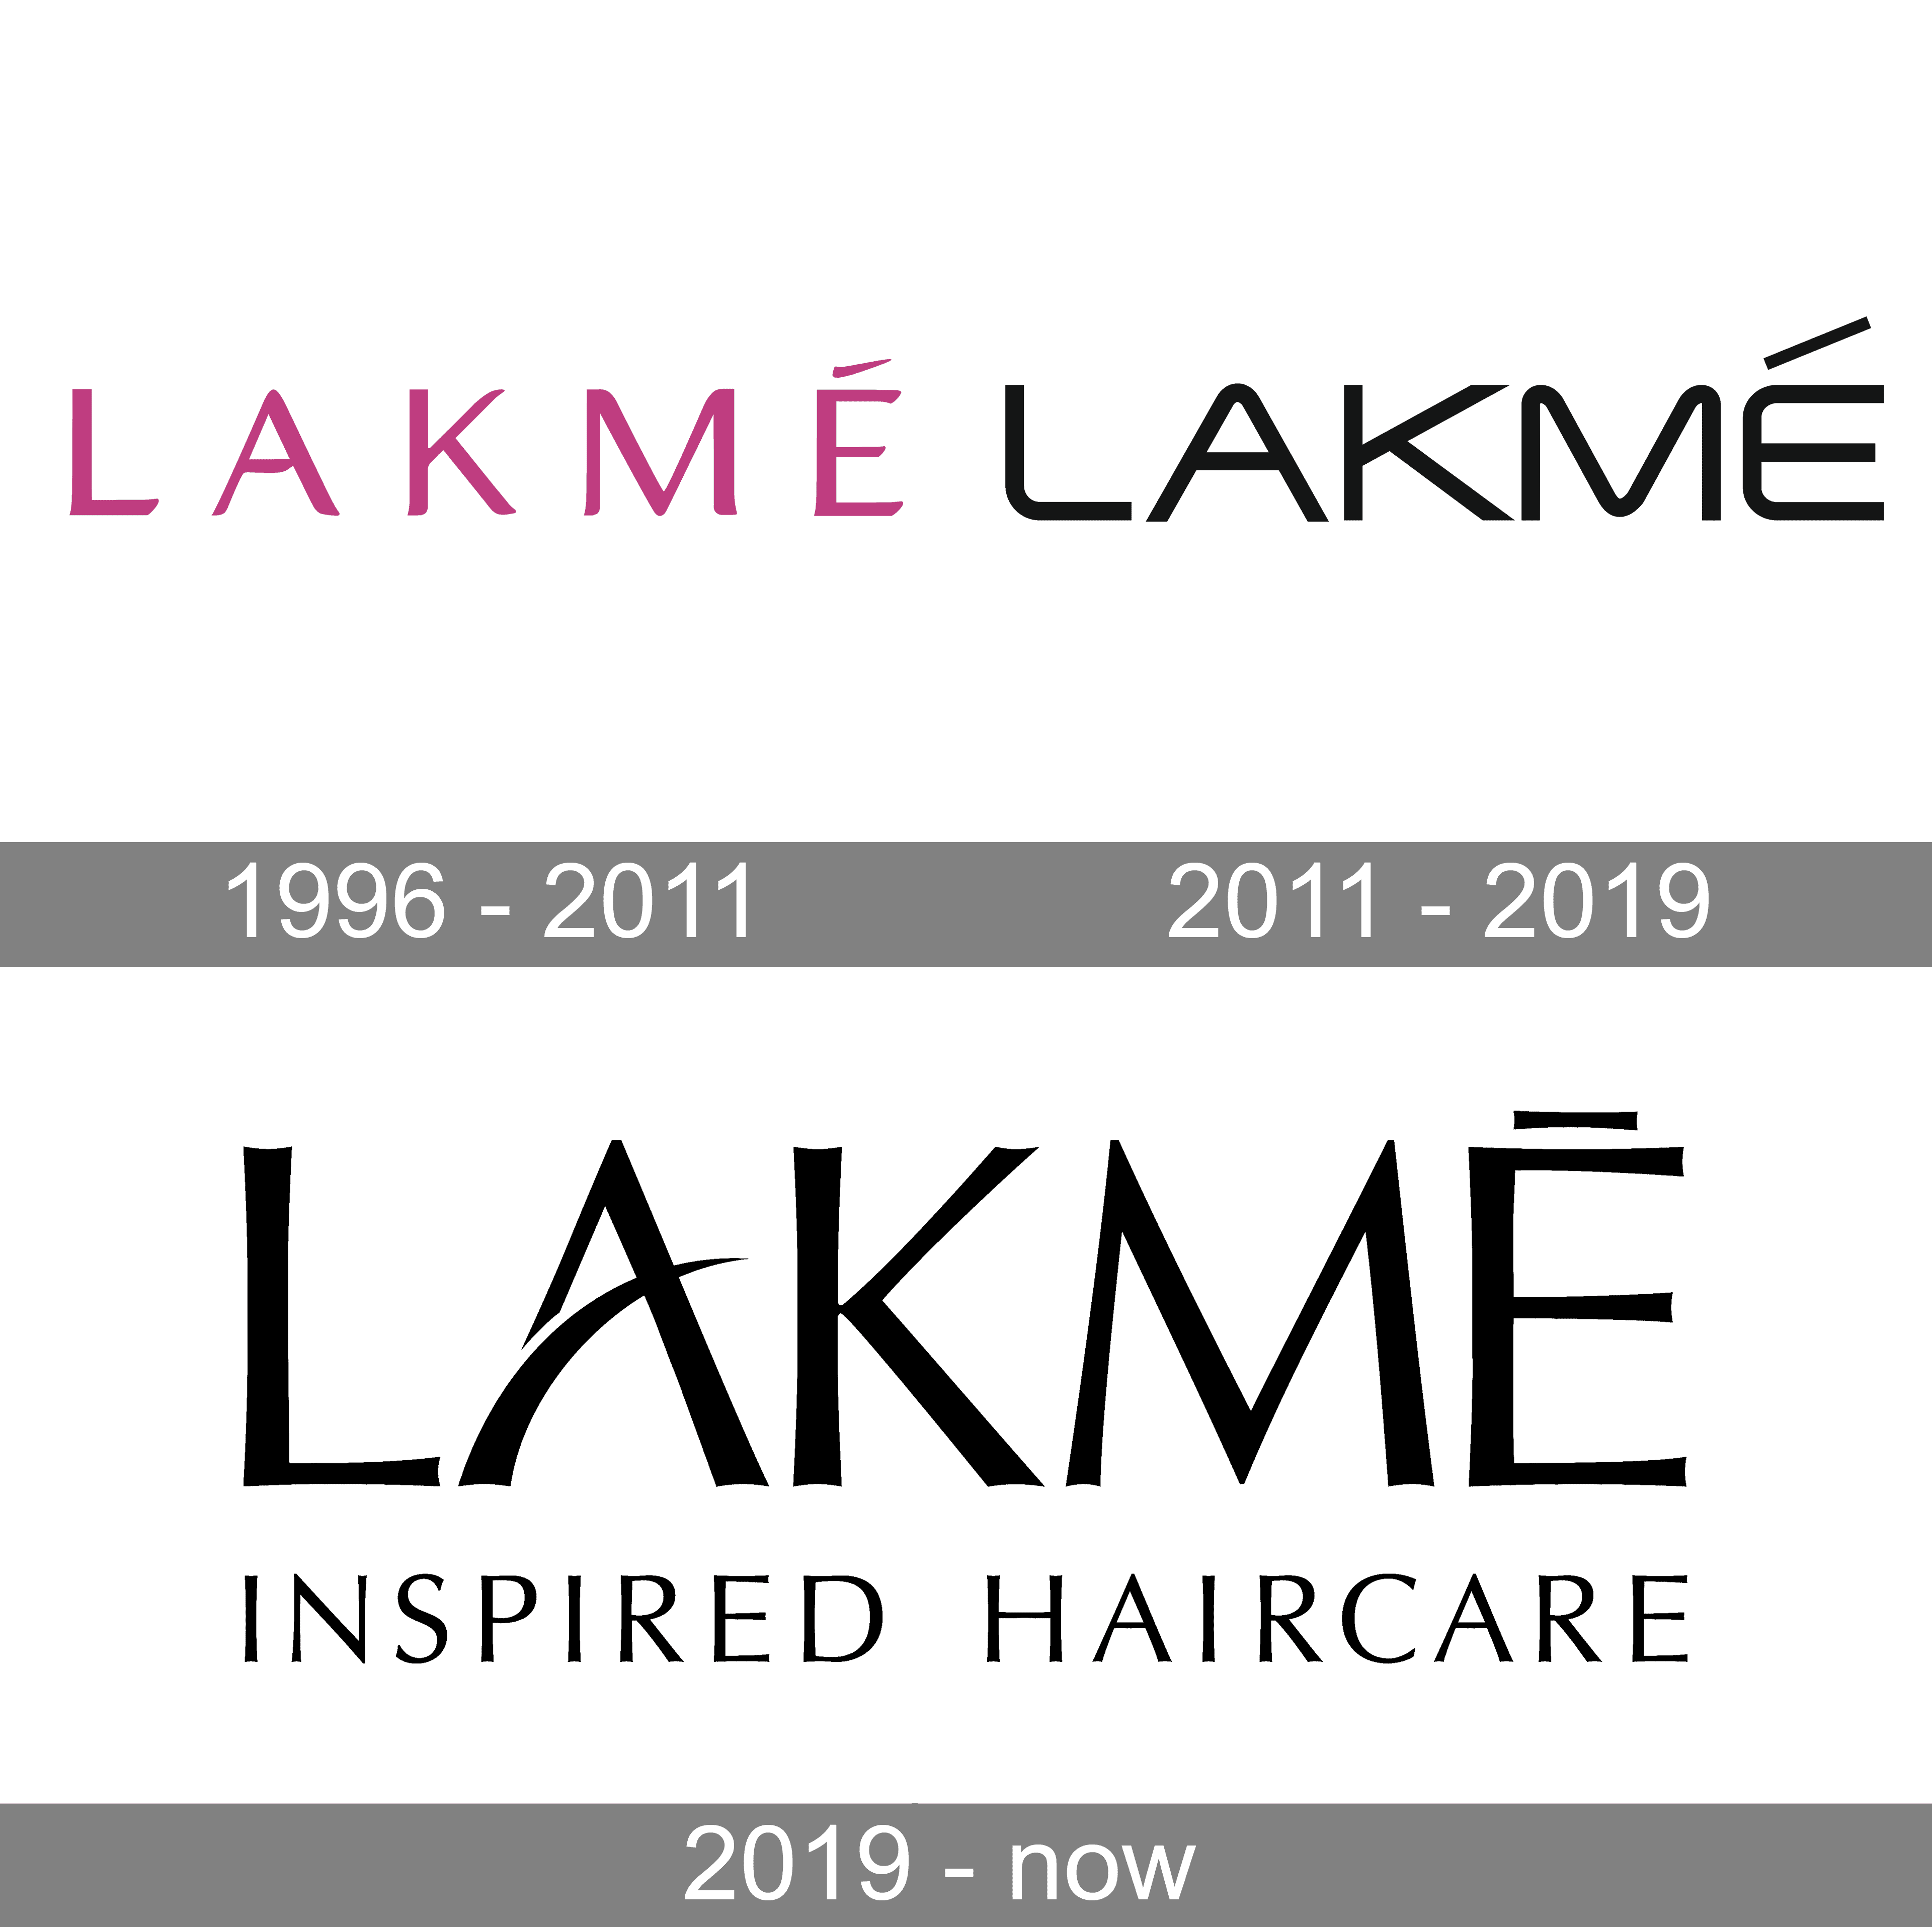 LAKME INSPIRED HAIRCARE (@lakme_russia) • Instagram photos and videos